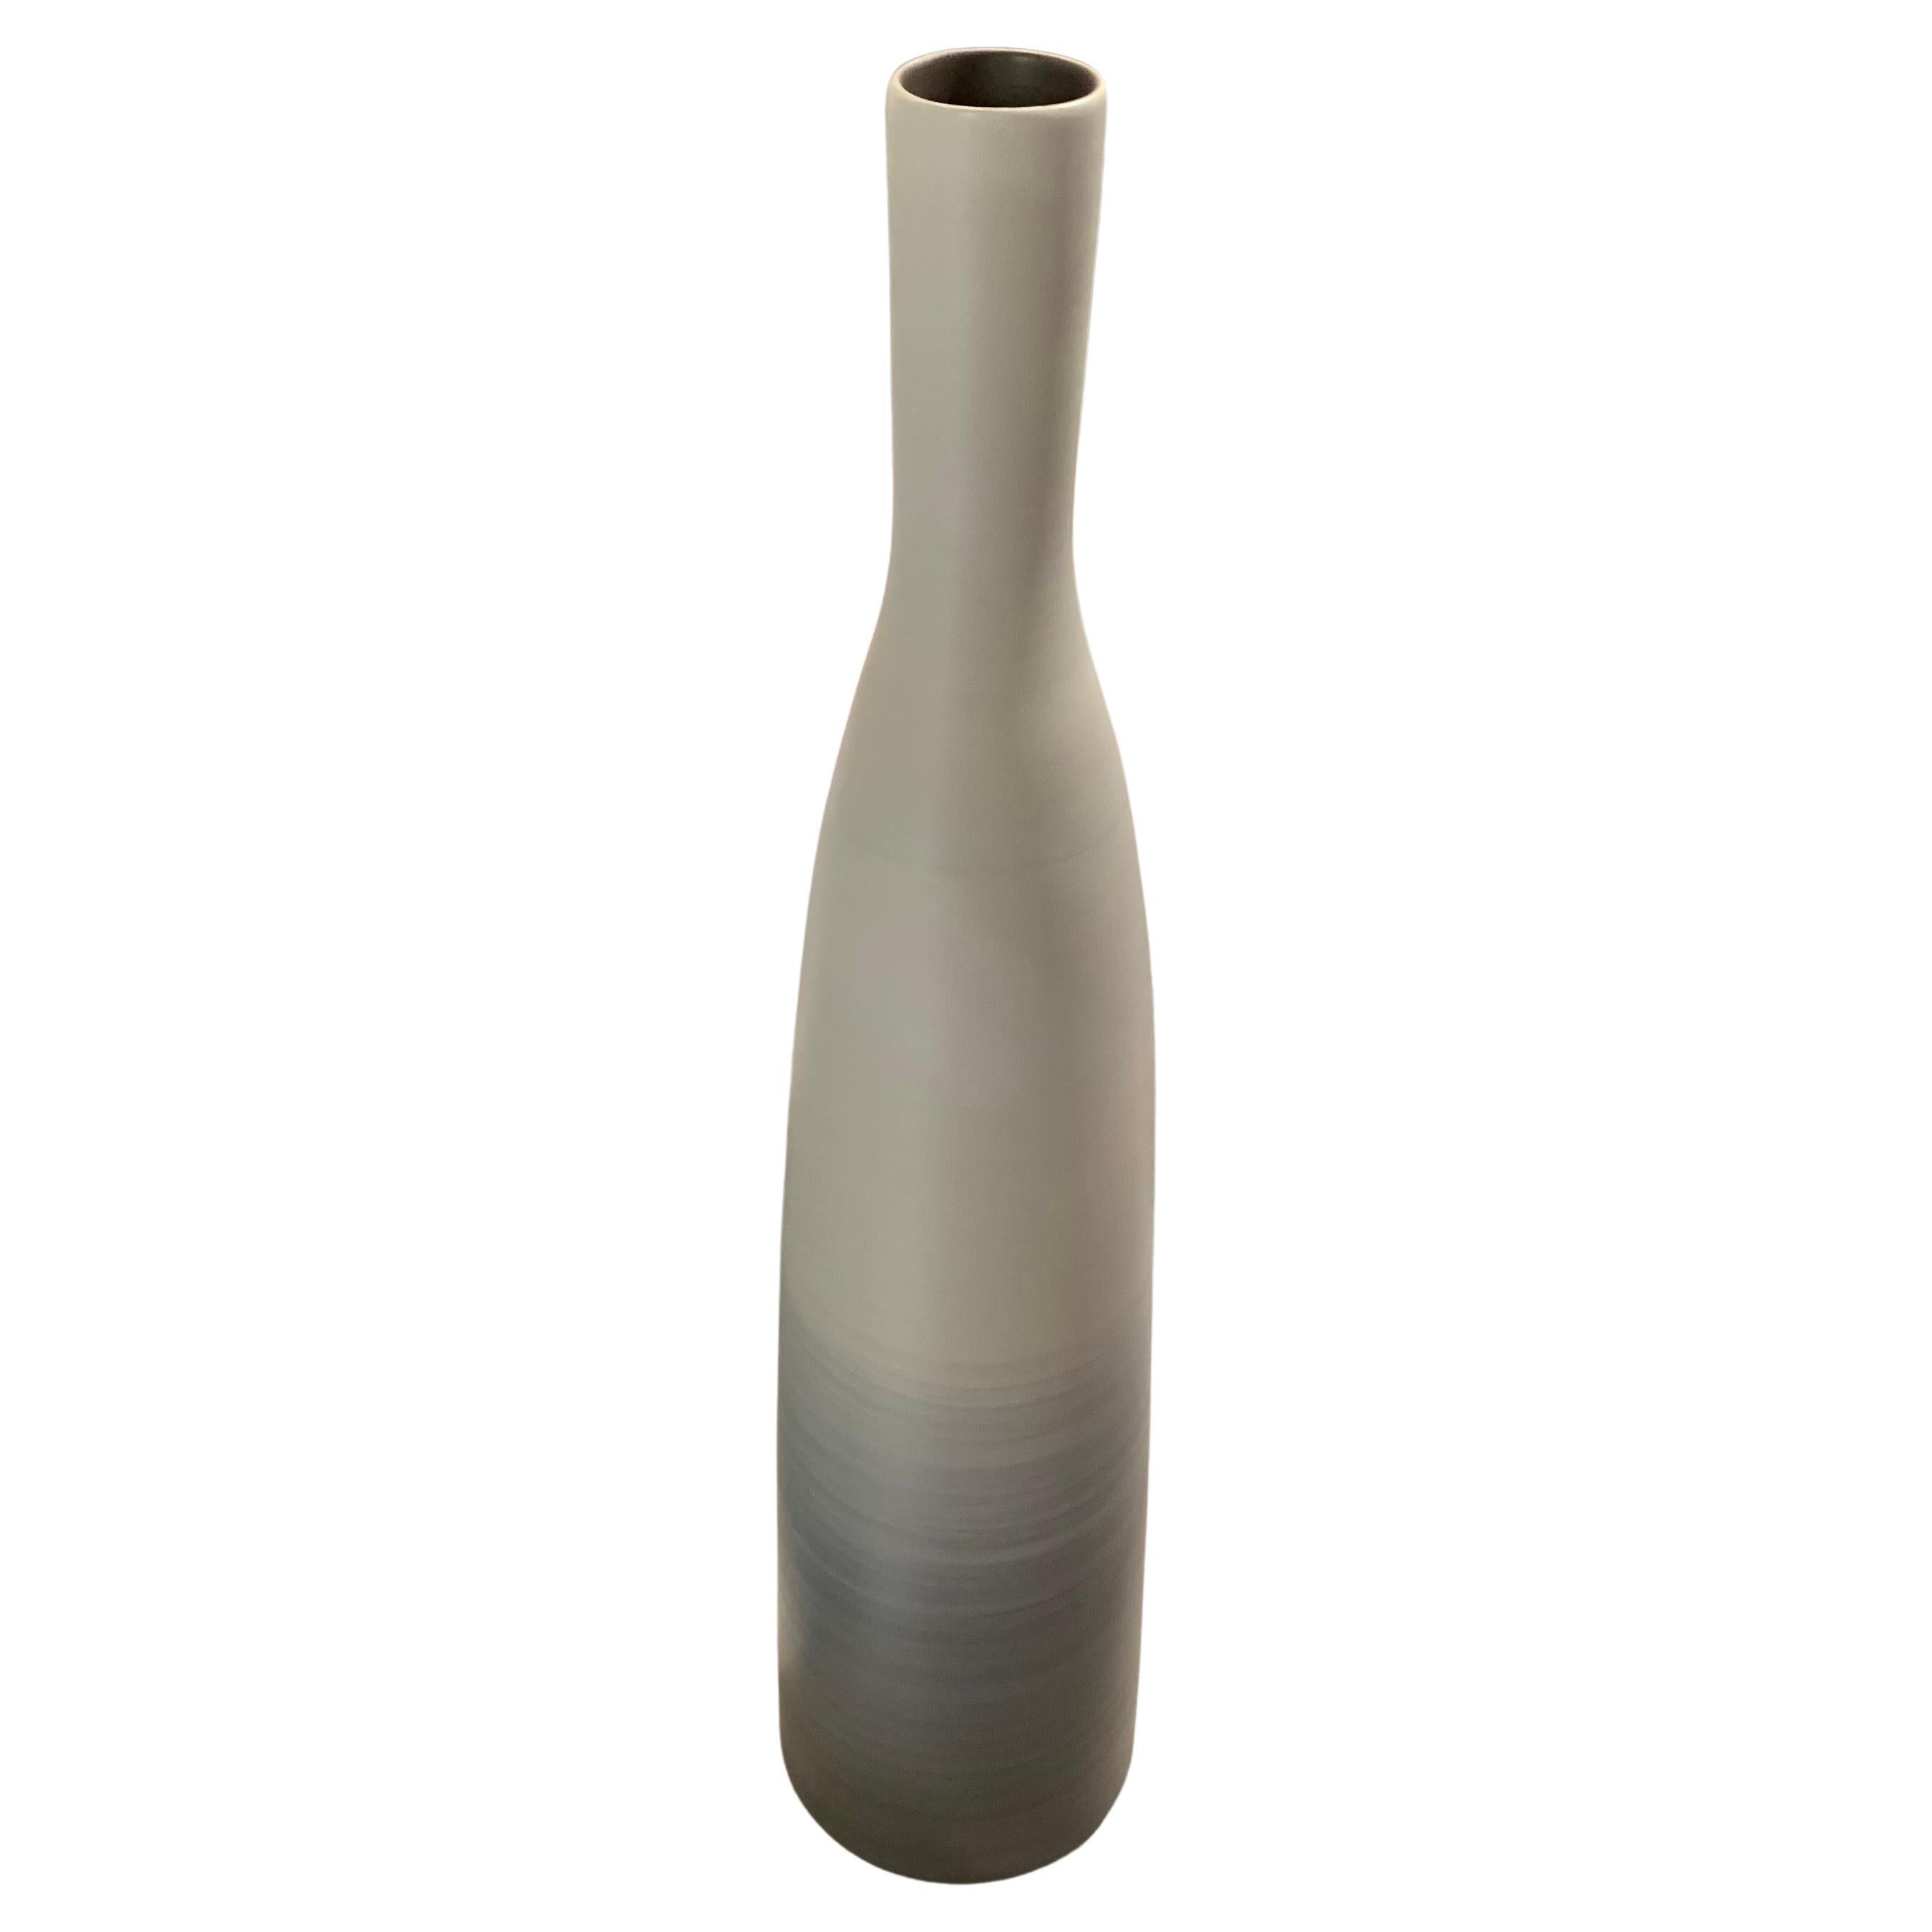 Contemporary Italian tall thin vase with decorative ombre glaze.
Shades of turquoise and grey at the bottom, ascending to solid pale taupe above.
Available in three sizes ( S6196 S6198 )
Together make an attractive presentation.